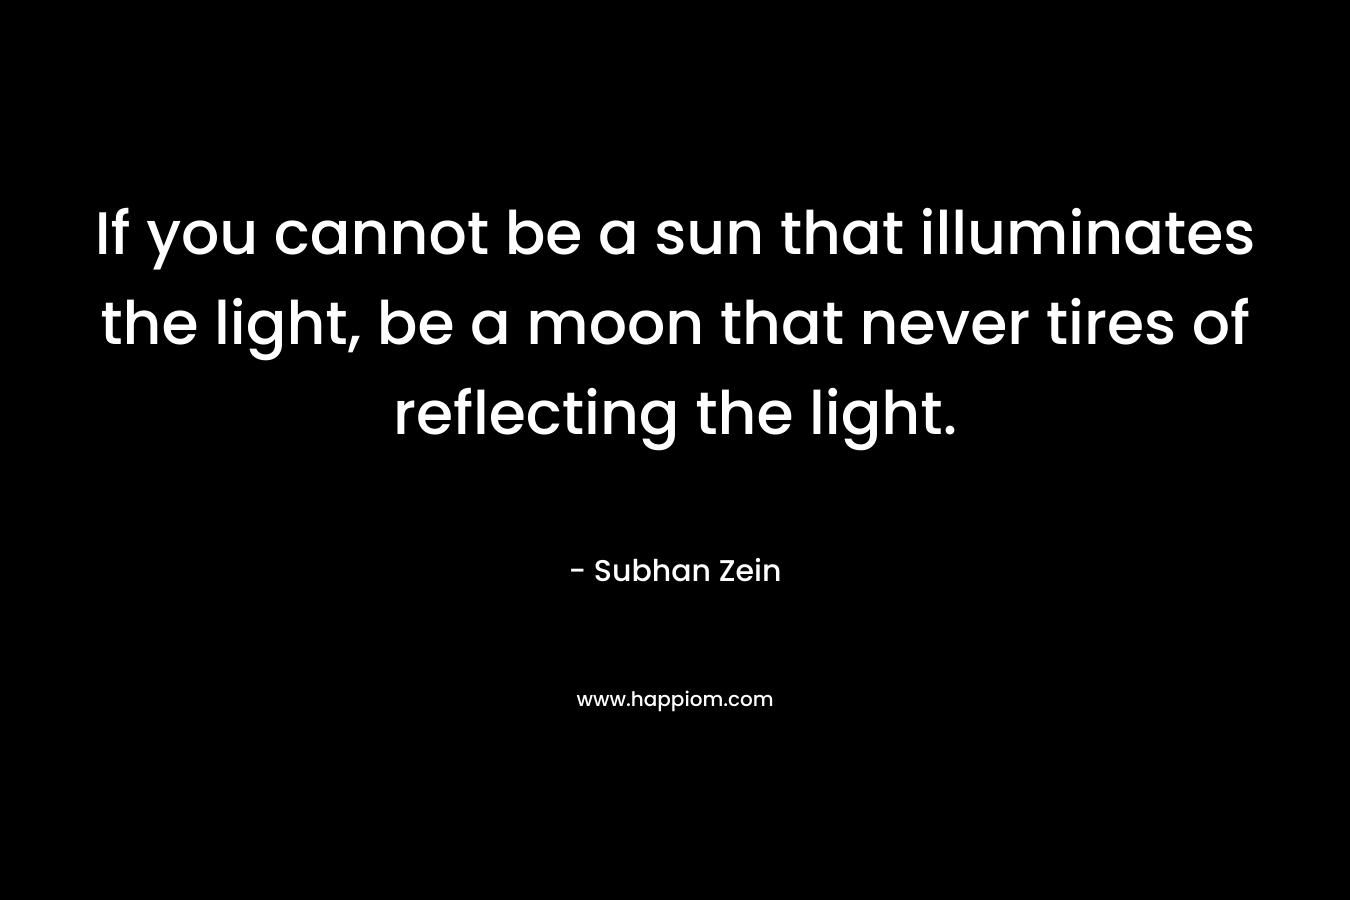 If you cannot be a sun that illuminates the light, be a moon that never tires of reflecting the light. – Subhan Zein